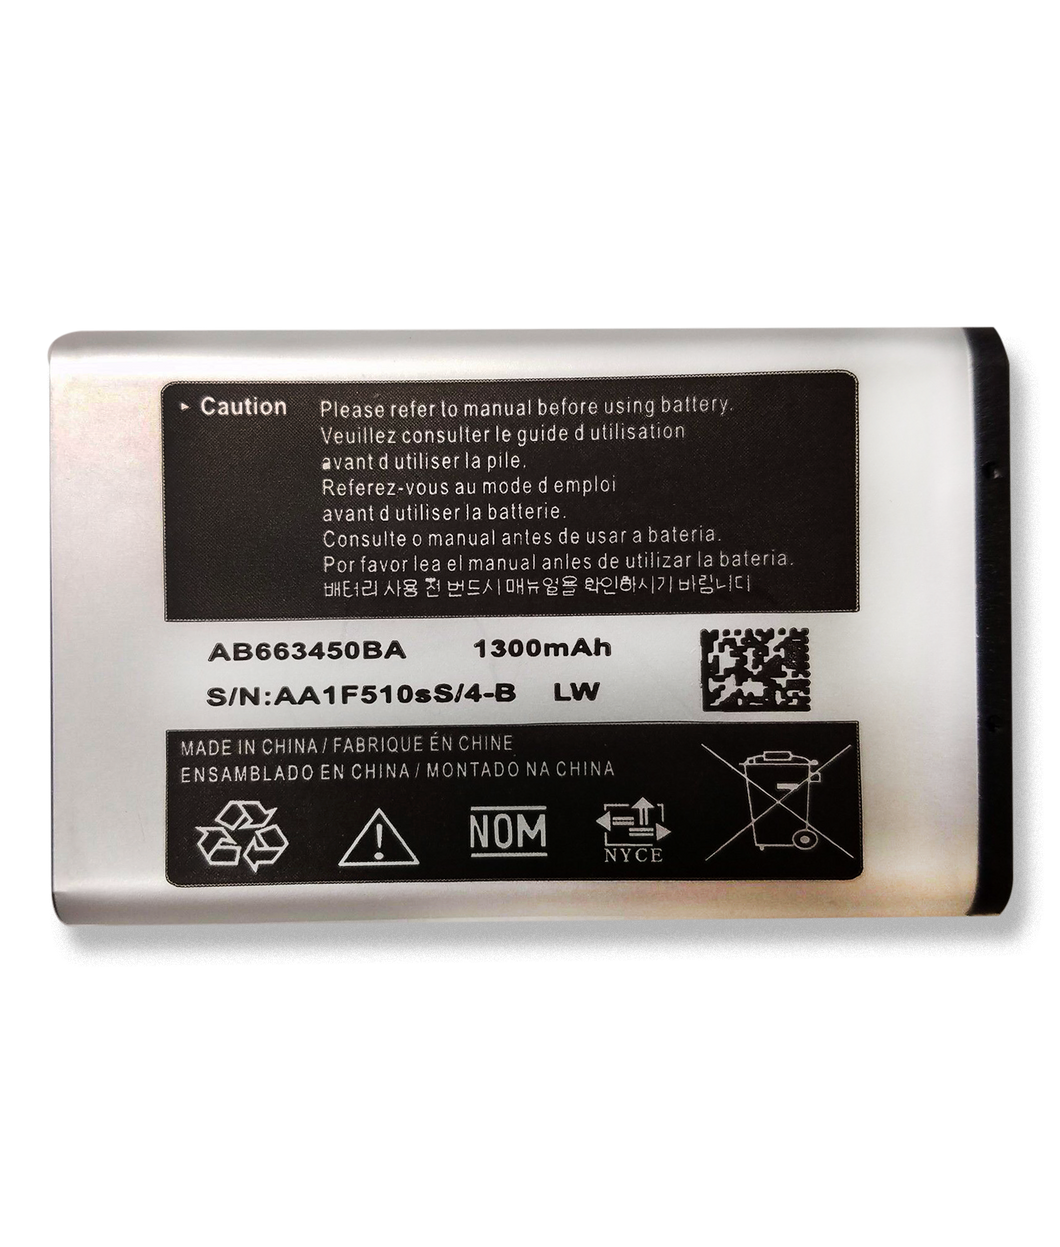 Replacement Battery for AT&T Samsung SGH-A847 RUGBY 2  AB663450BA 1300mAh